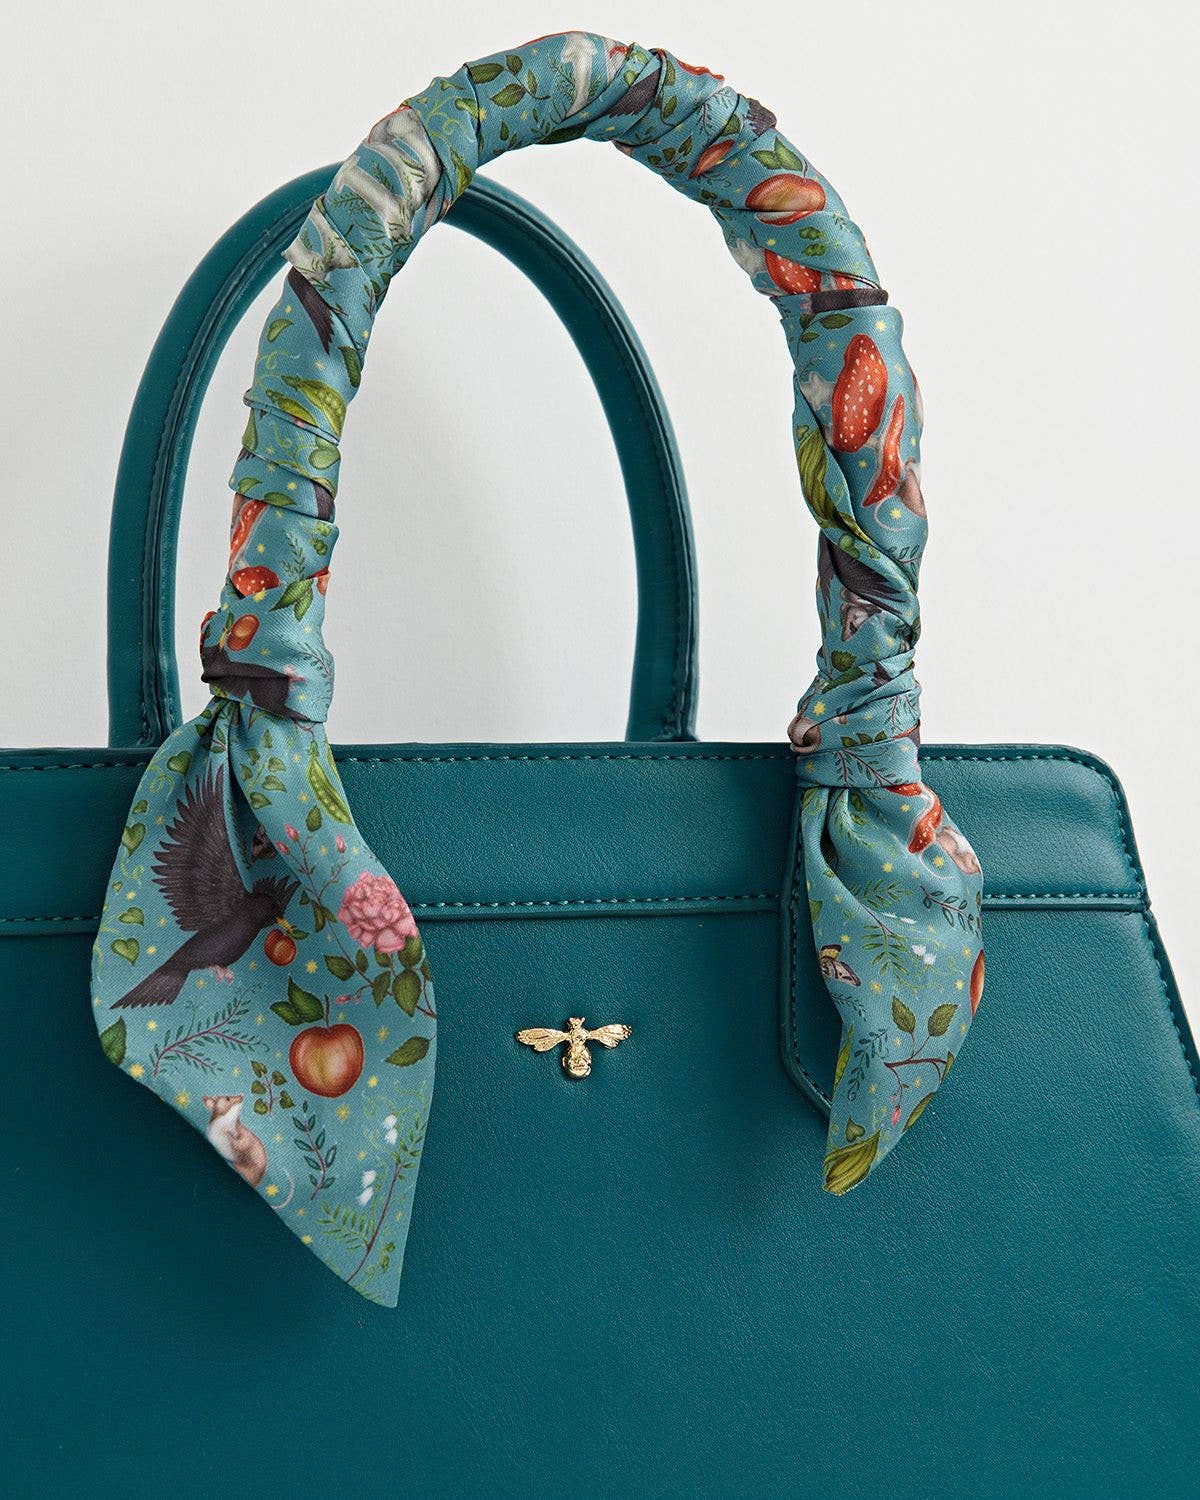 Into the Woods Teal Tote